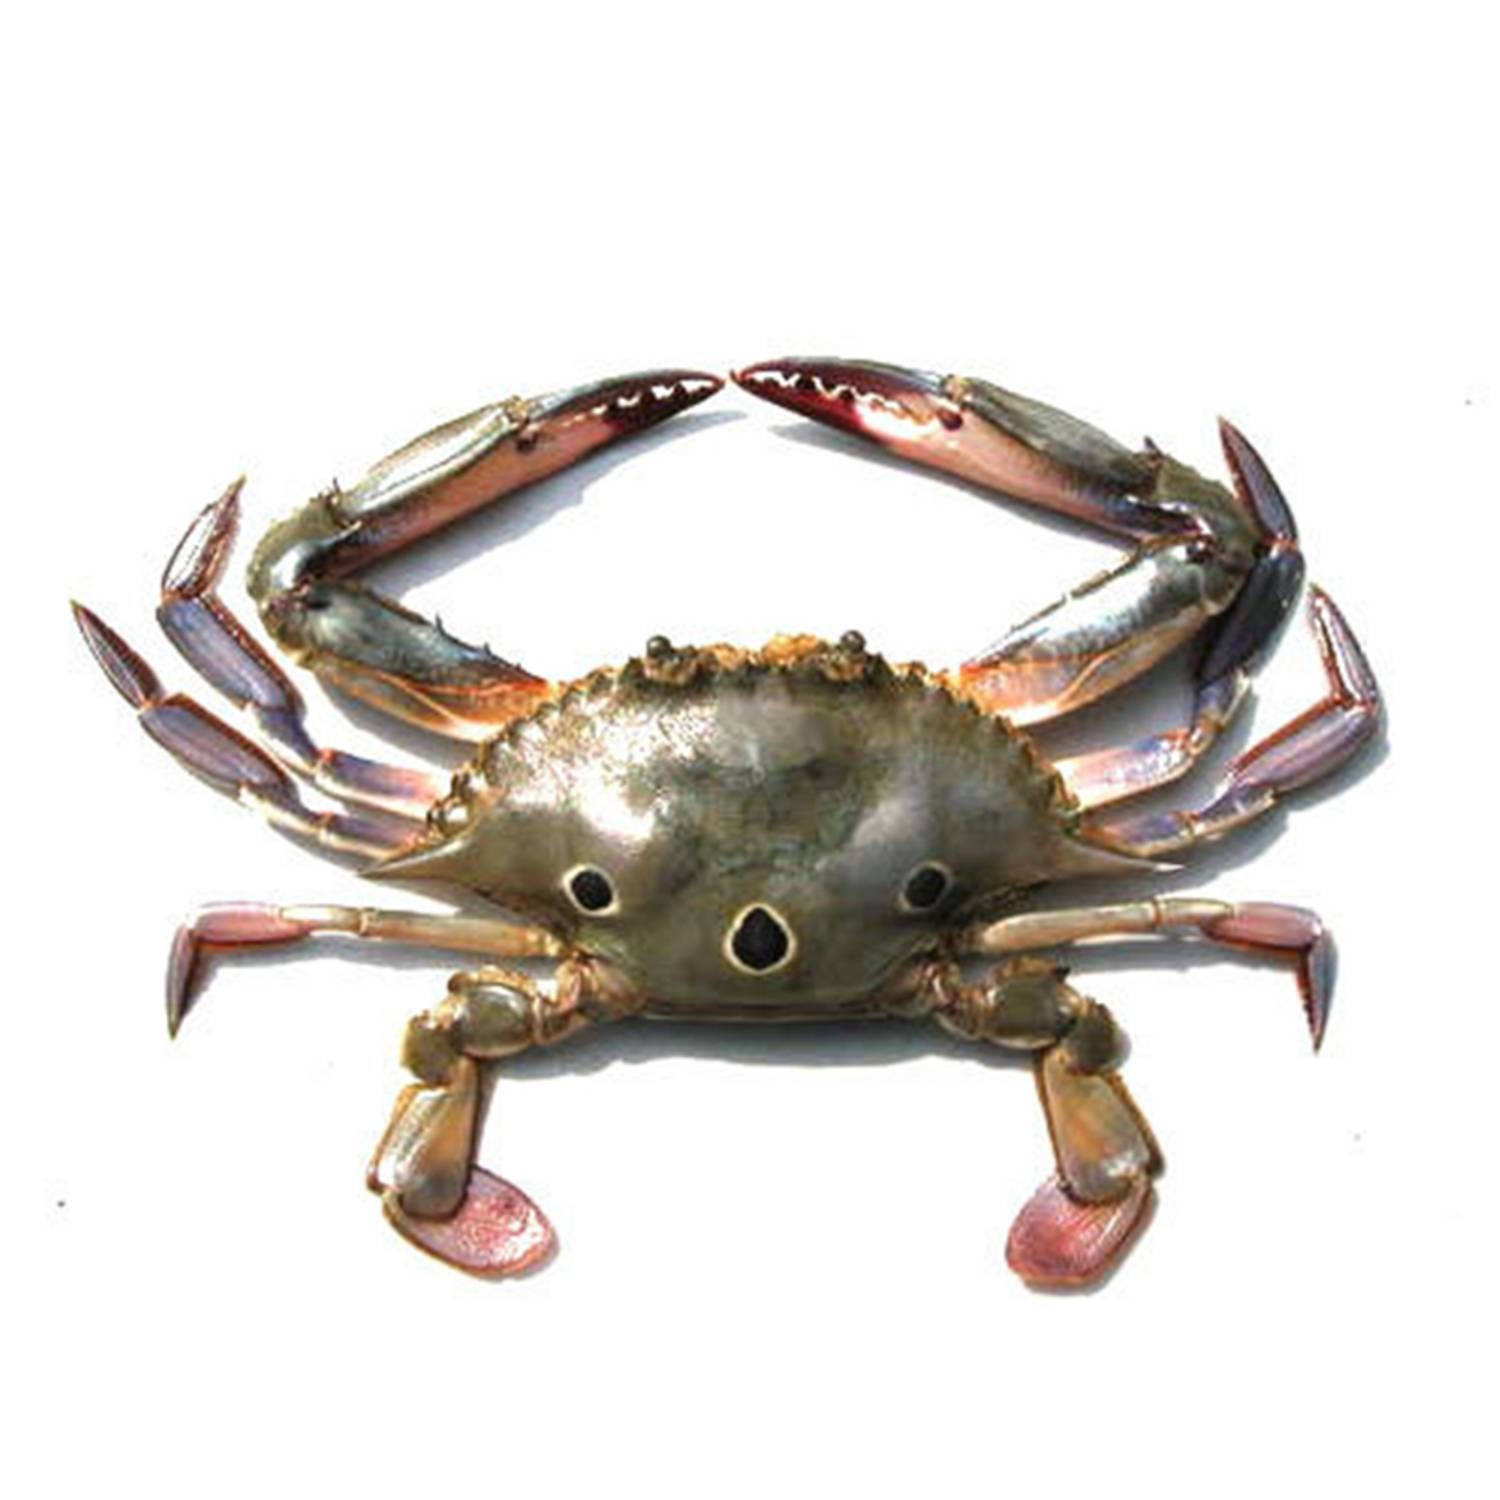 Three spotted Crab - Whole, Cleaned